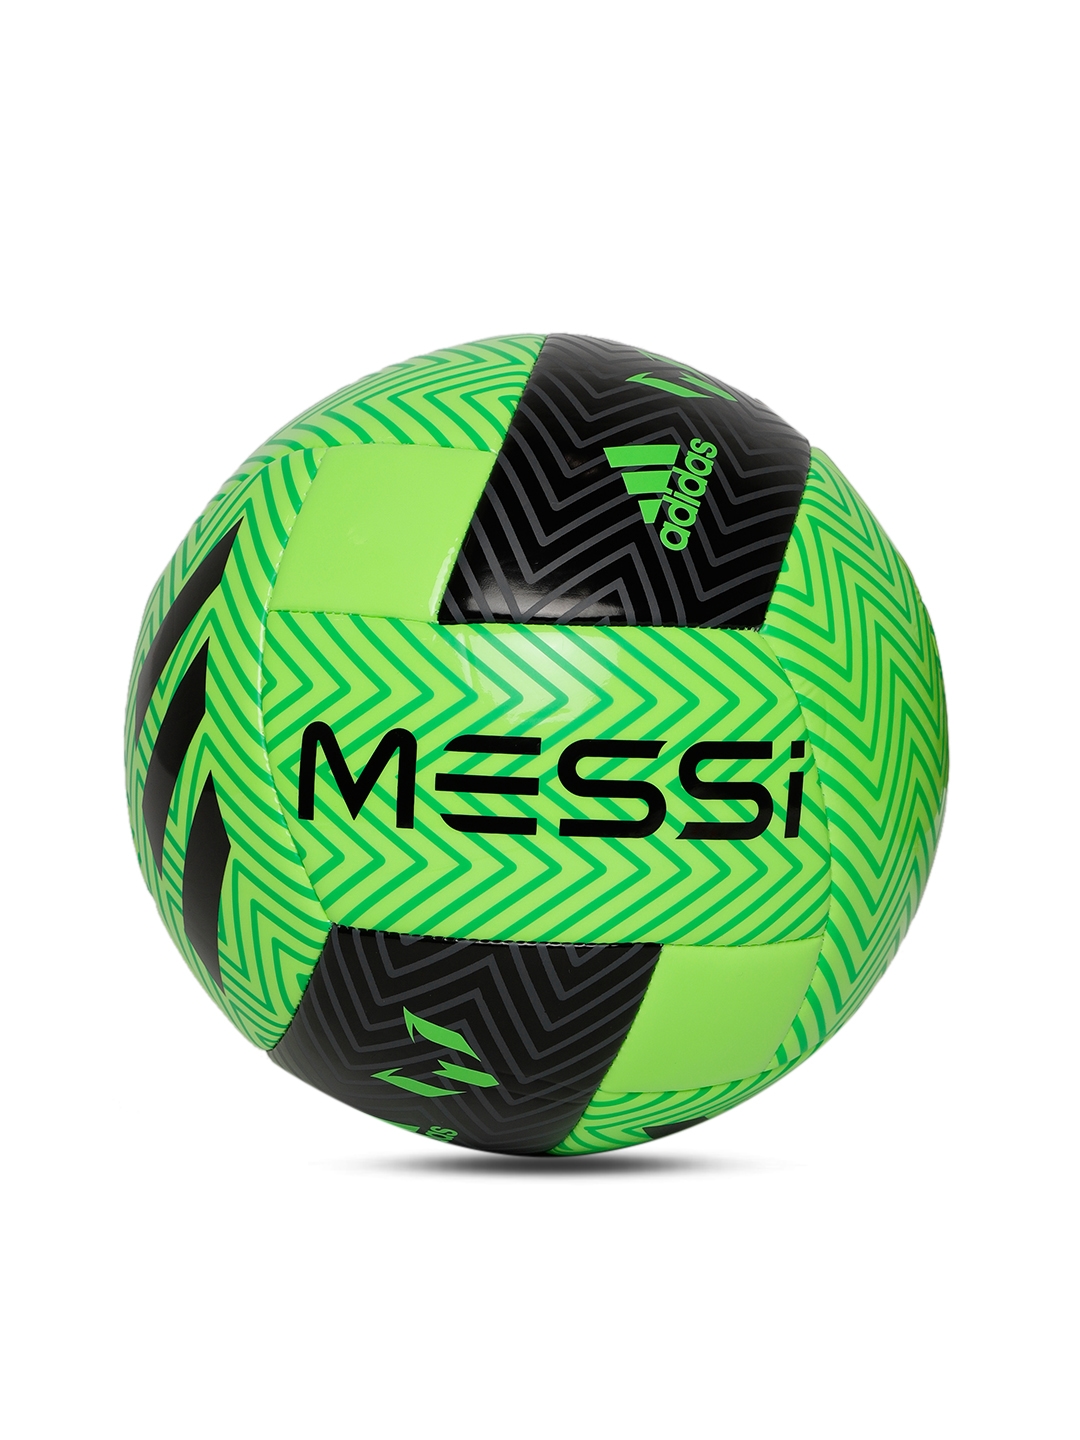 adidas messi q3 ball review